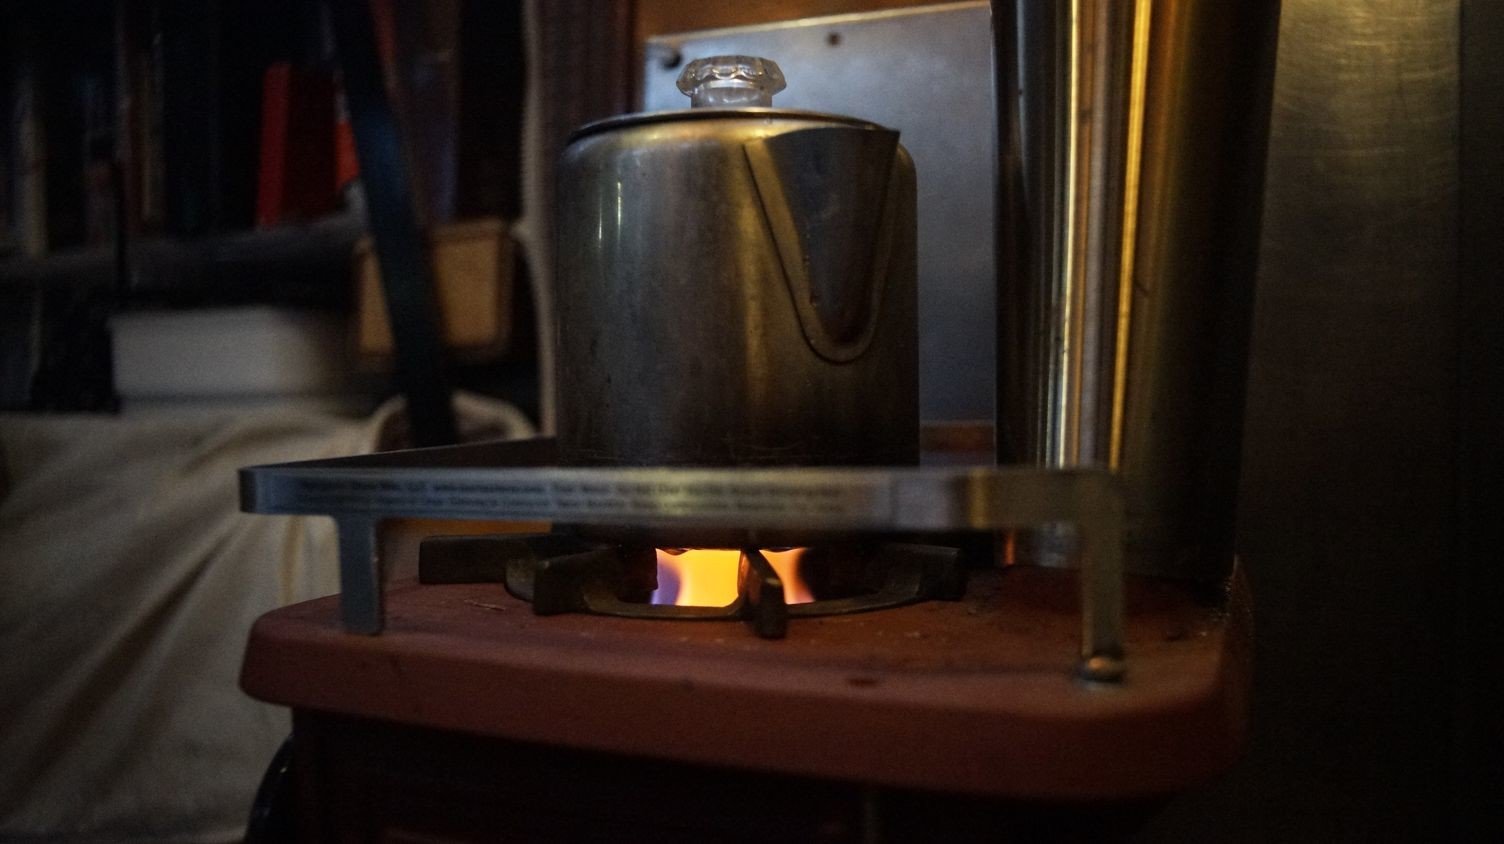 A photo of an alcohol burner nestled in a woodstove heating a kettle of water